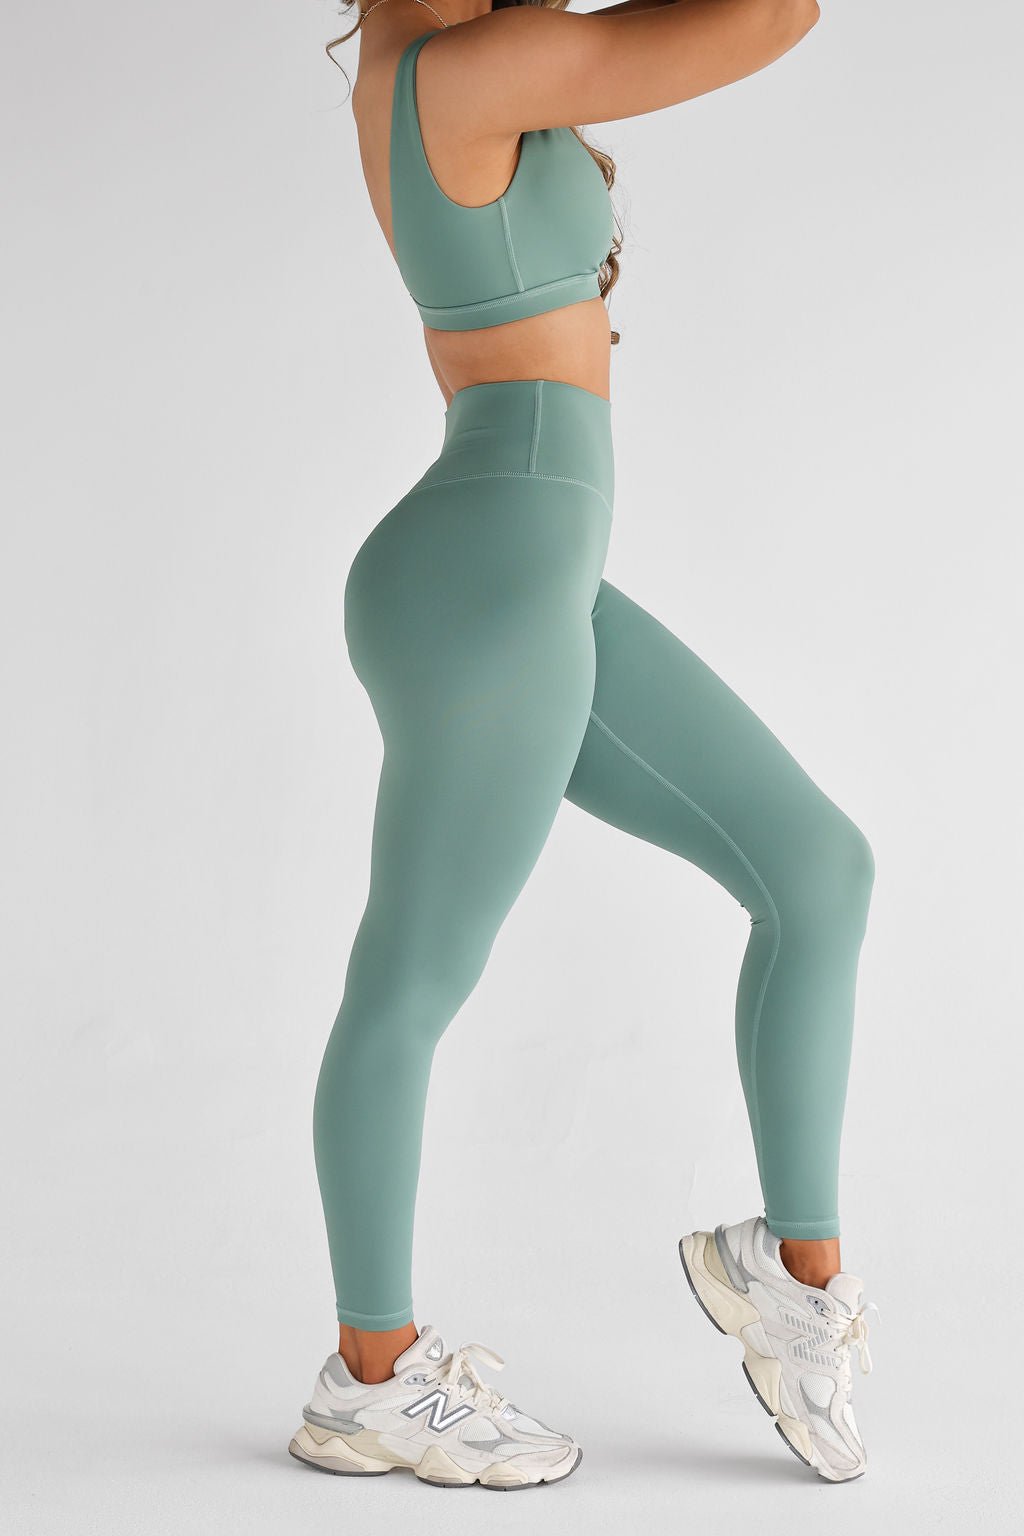 SCULPT Full Length Leggings - Sage SHIPPING FROM 3/11 - LEELO ACTIVE